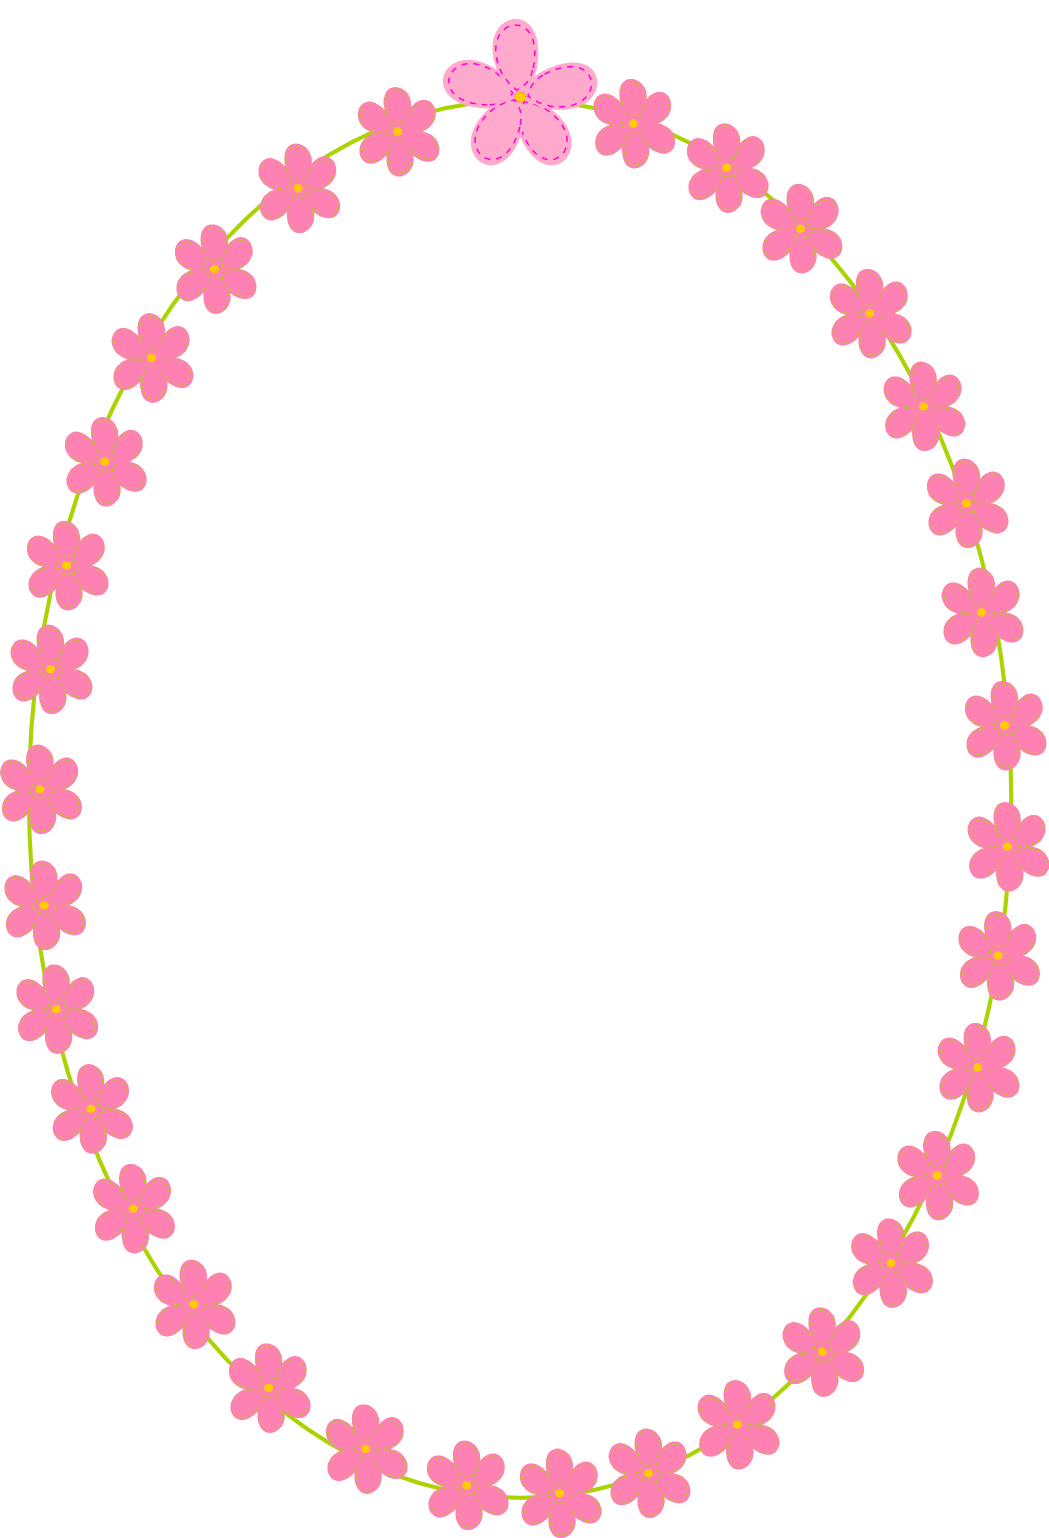 free clipart frames flowers - photo #11